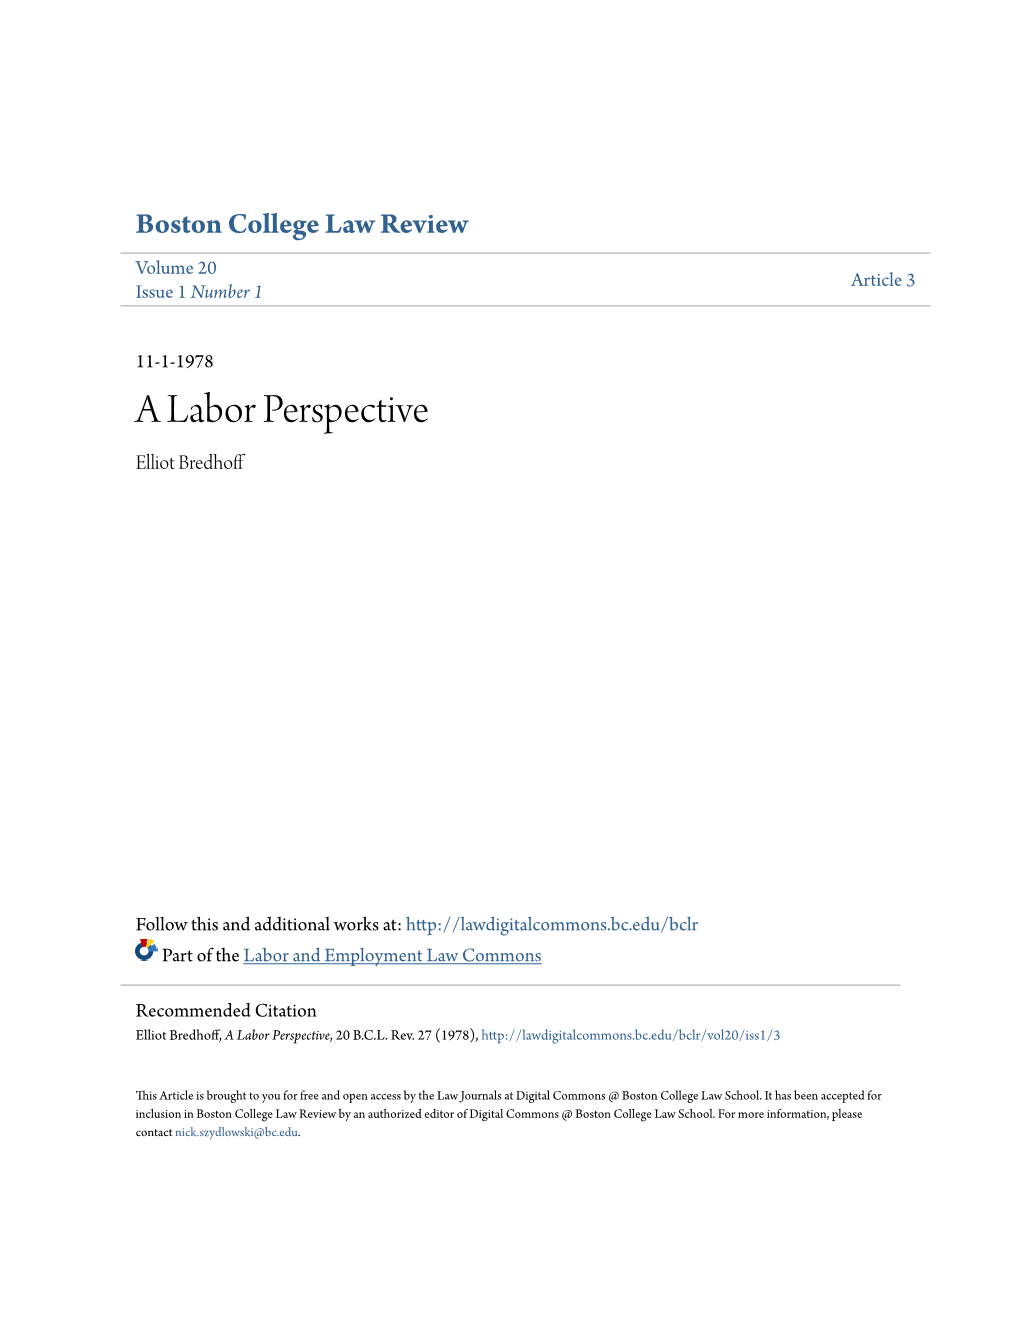 A Labor Perspective Elliot Bredhoff